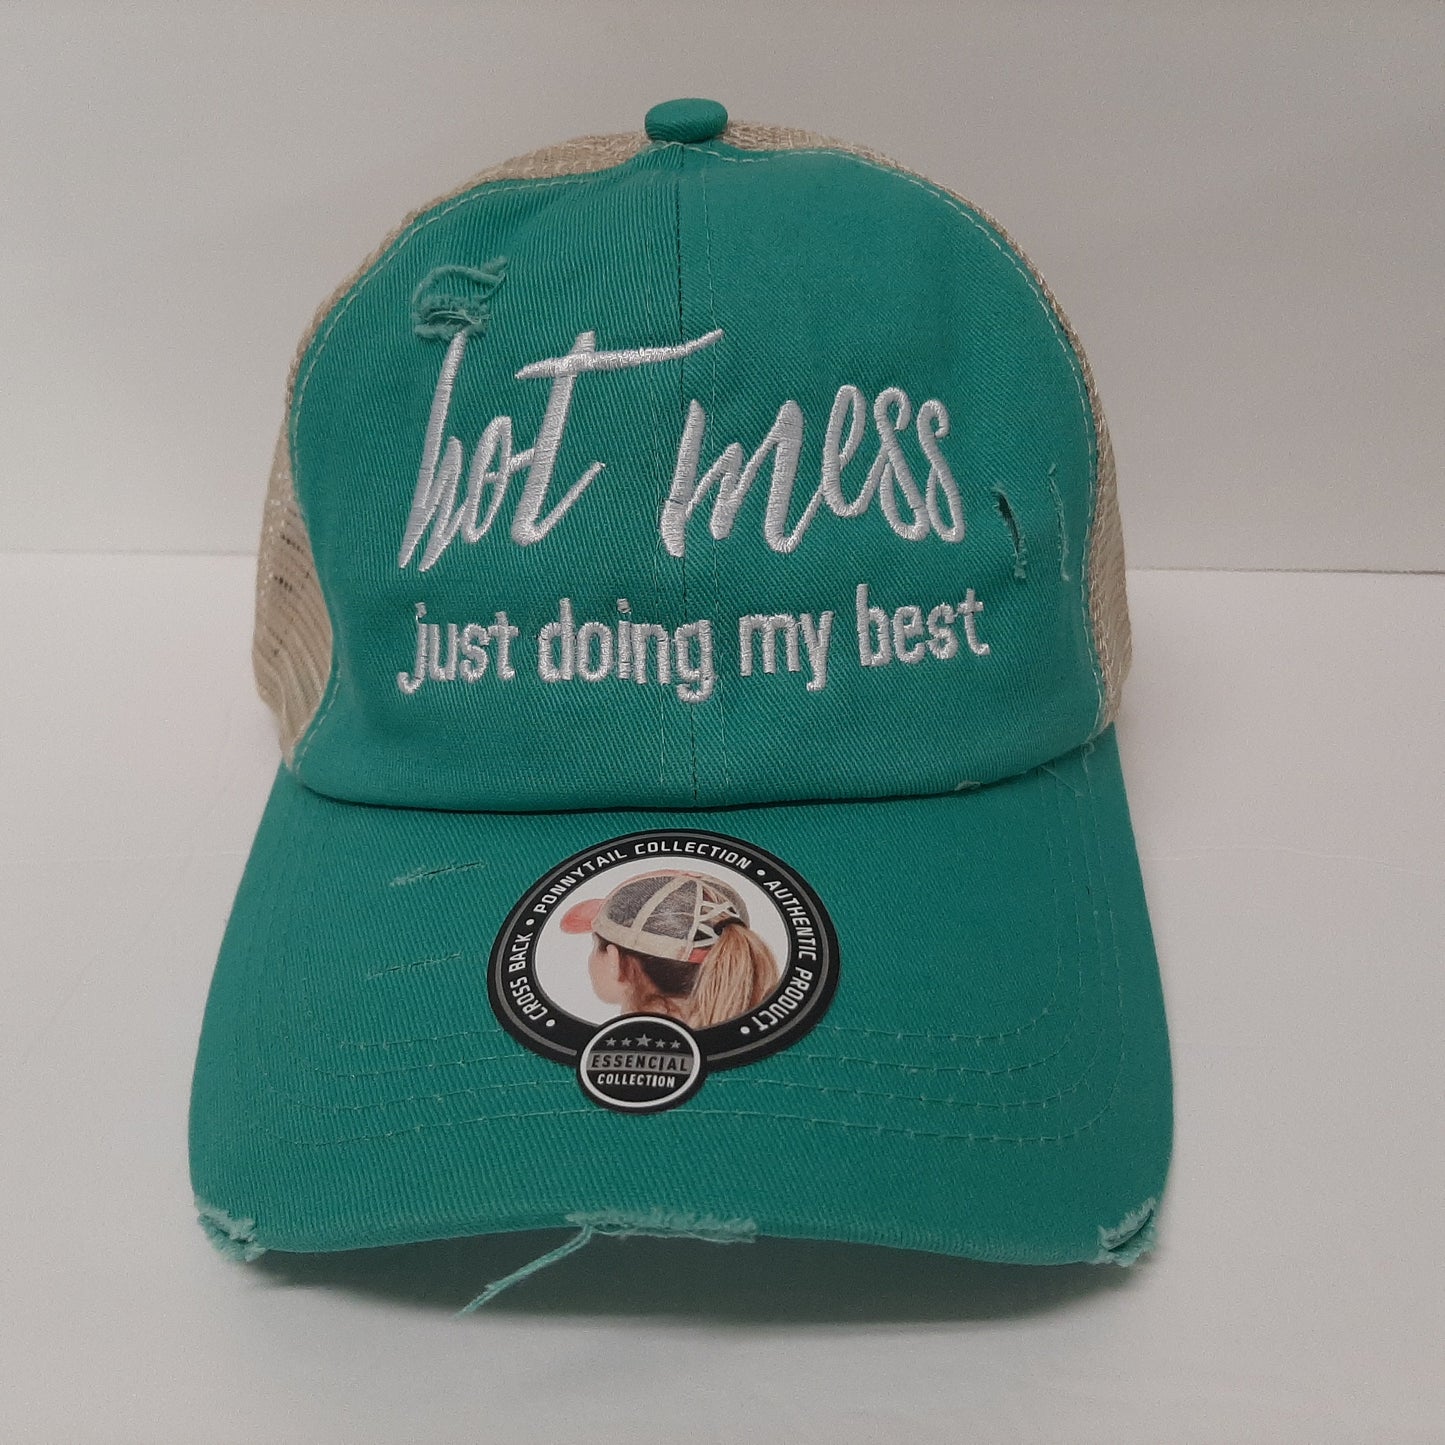 Hot Mess Women's Embroidered Pony Tail Criss Cross Hat Cap Teal Cotton